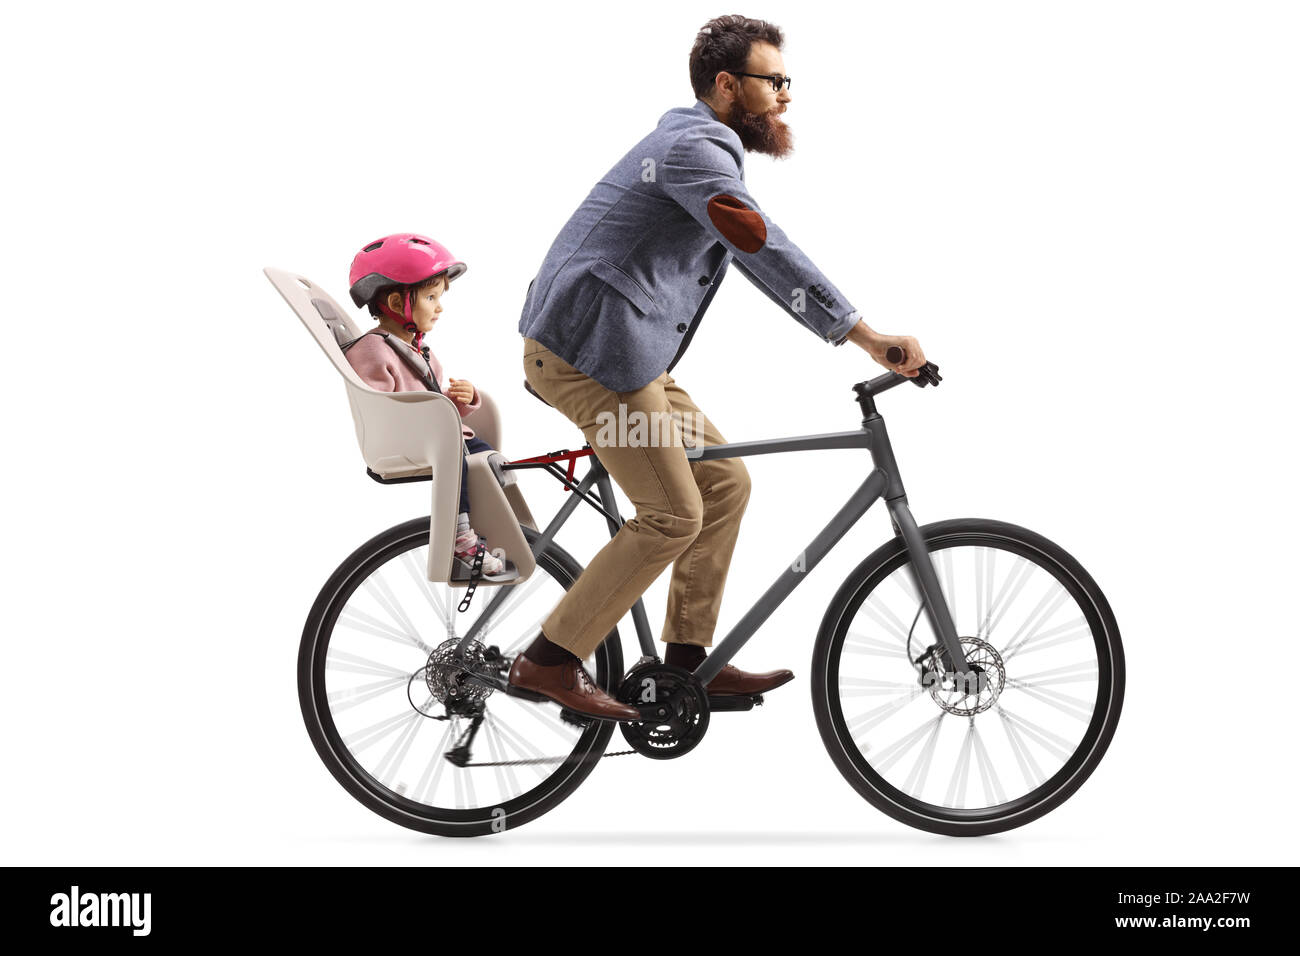 Man riding a bicycle with a little girl with a helmet inside a childs seat isolated on white background Stock Photo